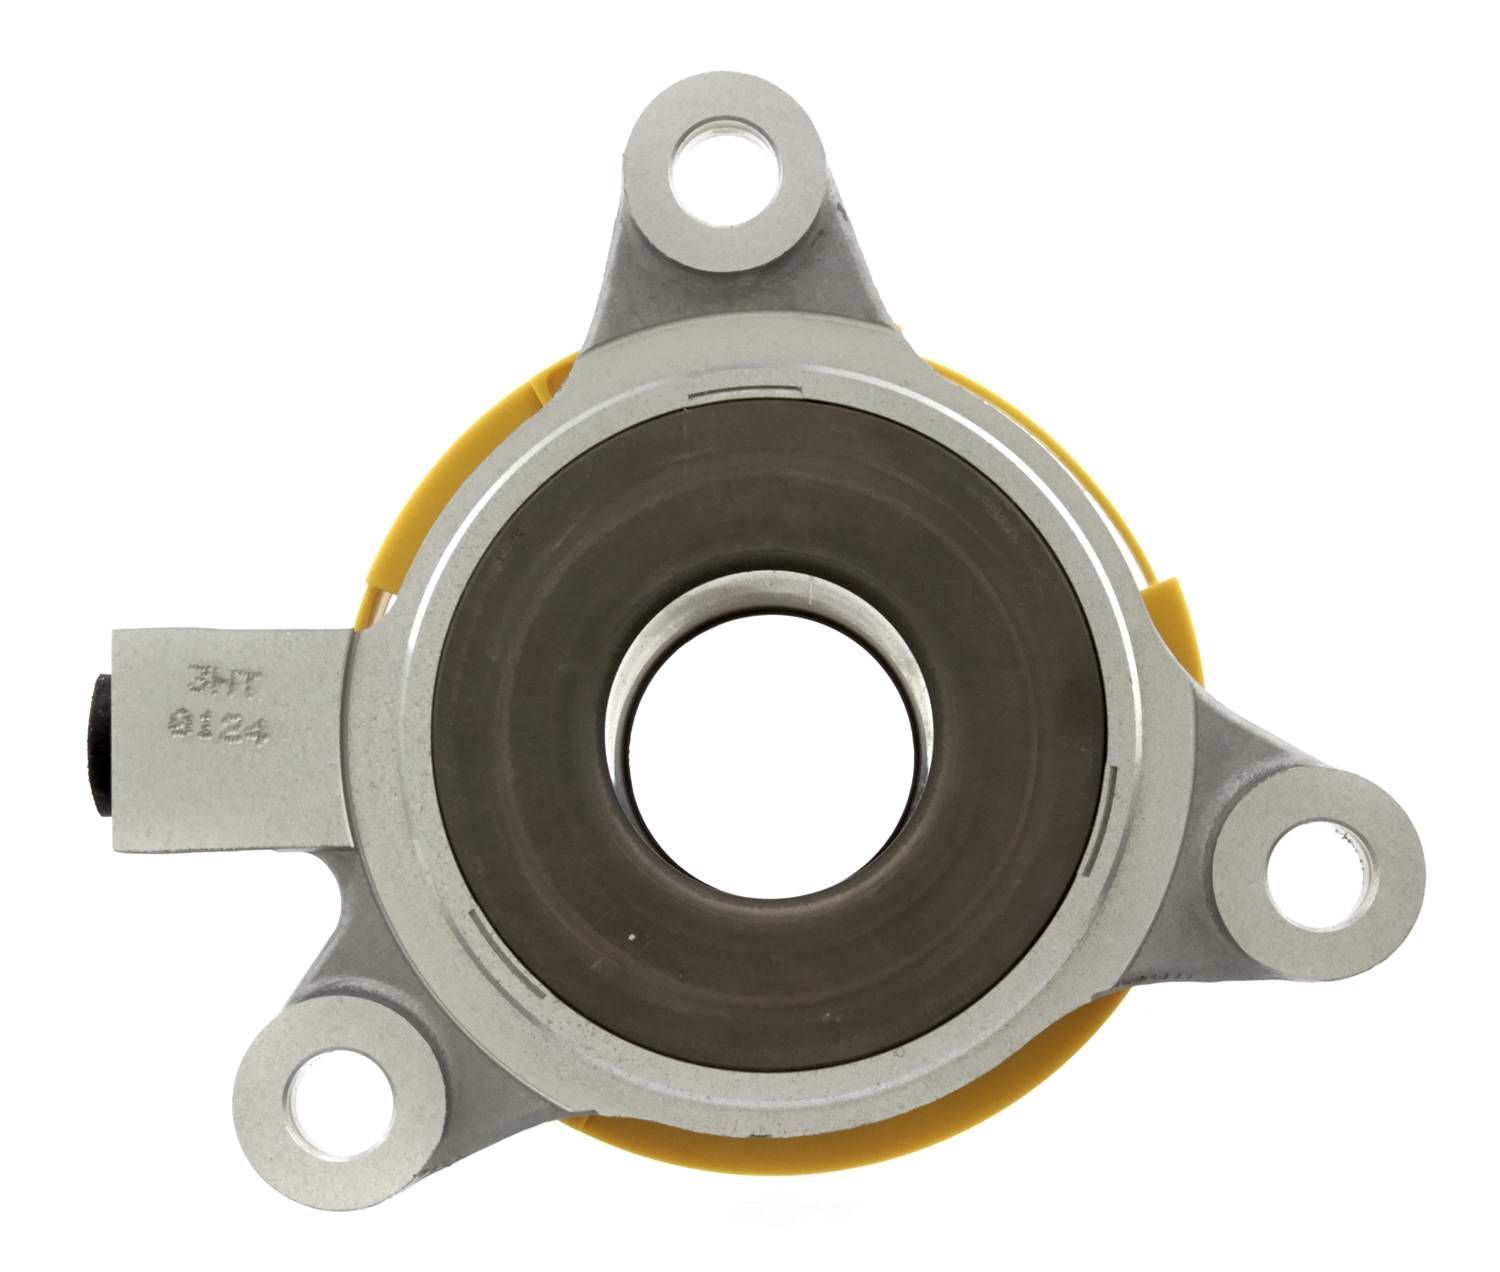 AISIN WORLD CORP. OF AMERICA - Clutch Release Bearing and Slave Cylinder Assembly - AIS SCT-001